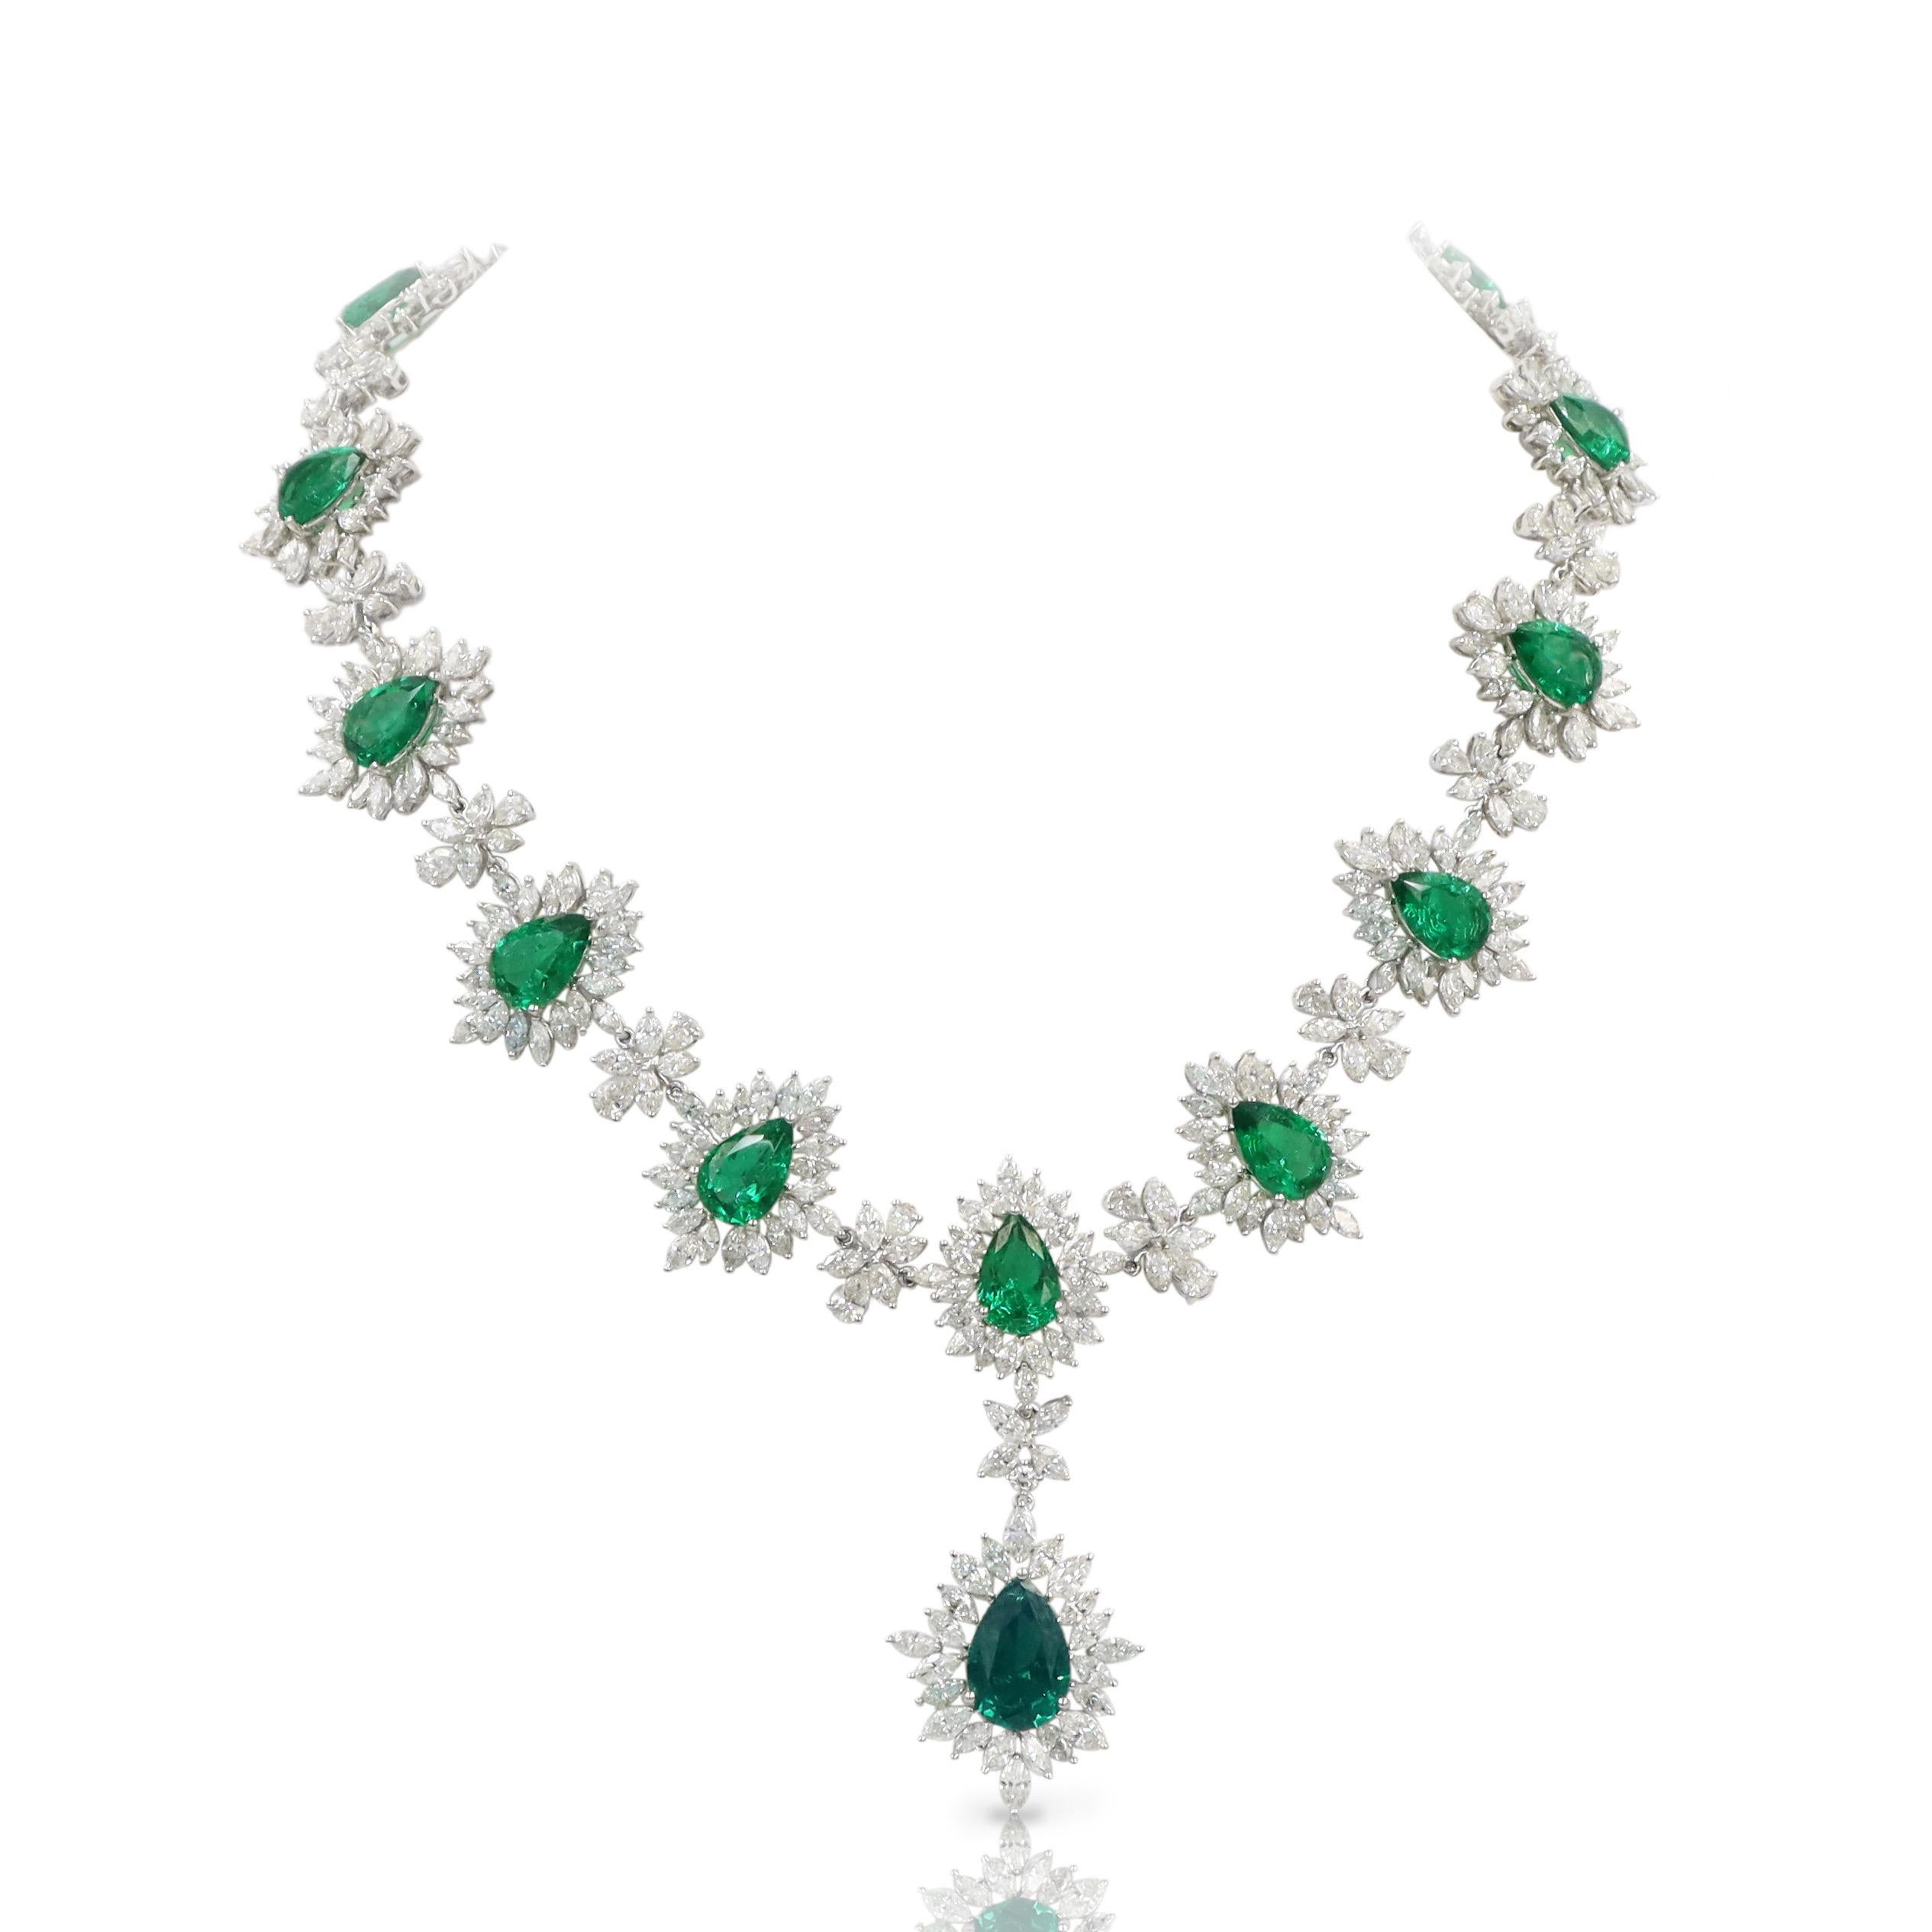 From the vault at Emilio Jewelry located on New York's iconic Fifth Avenue,
Featuring an astonishing array of high quality emeralds and diamonds to create this red carpet necklace. 
Gross Weight gold: over 100 grams 
Diamond Weight: 32.24 carats D-F